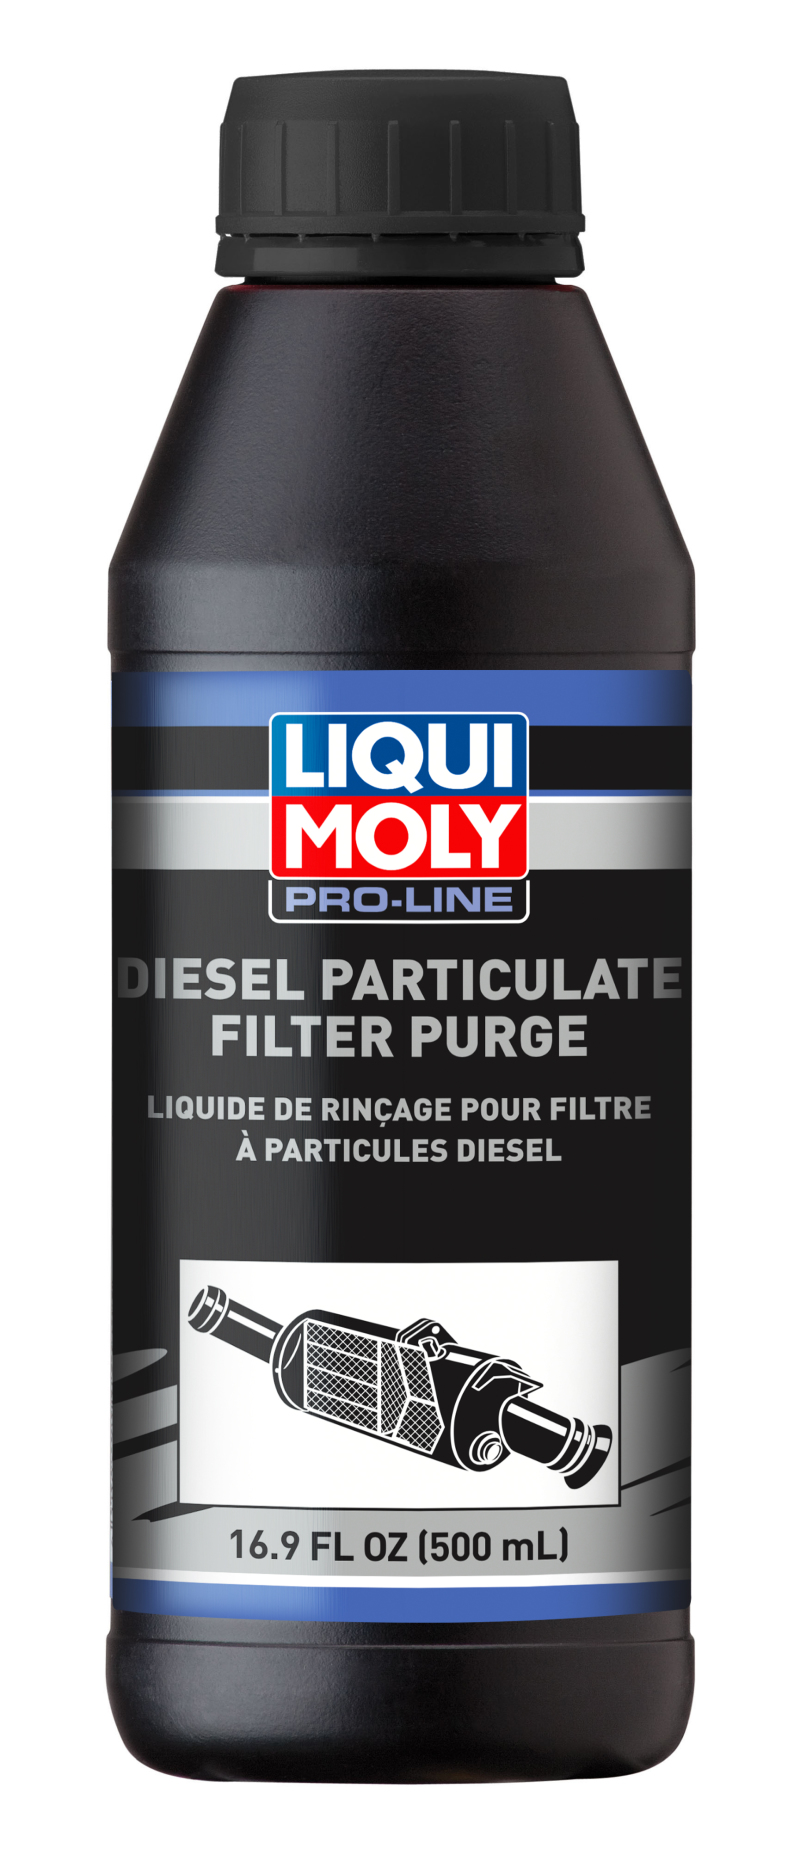 LIQUI MOLY 500mL Pro-Line Diesel Particulate Filter Purge - 20112